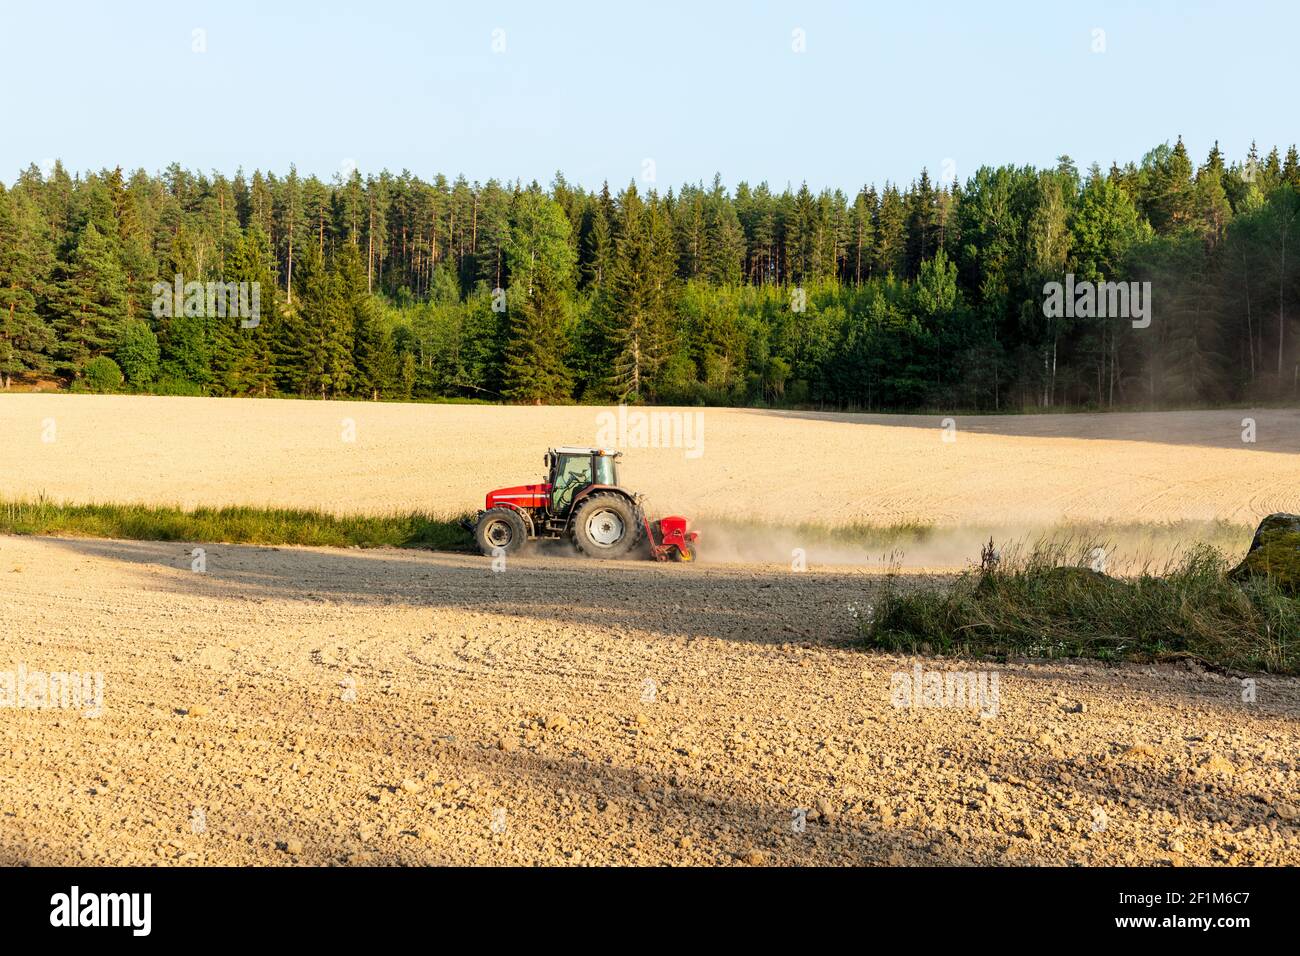 Tractor in field Stock Photo